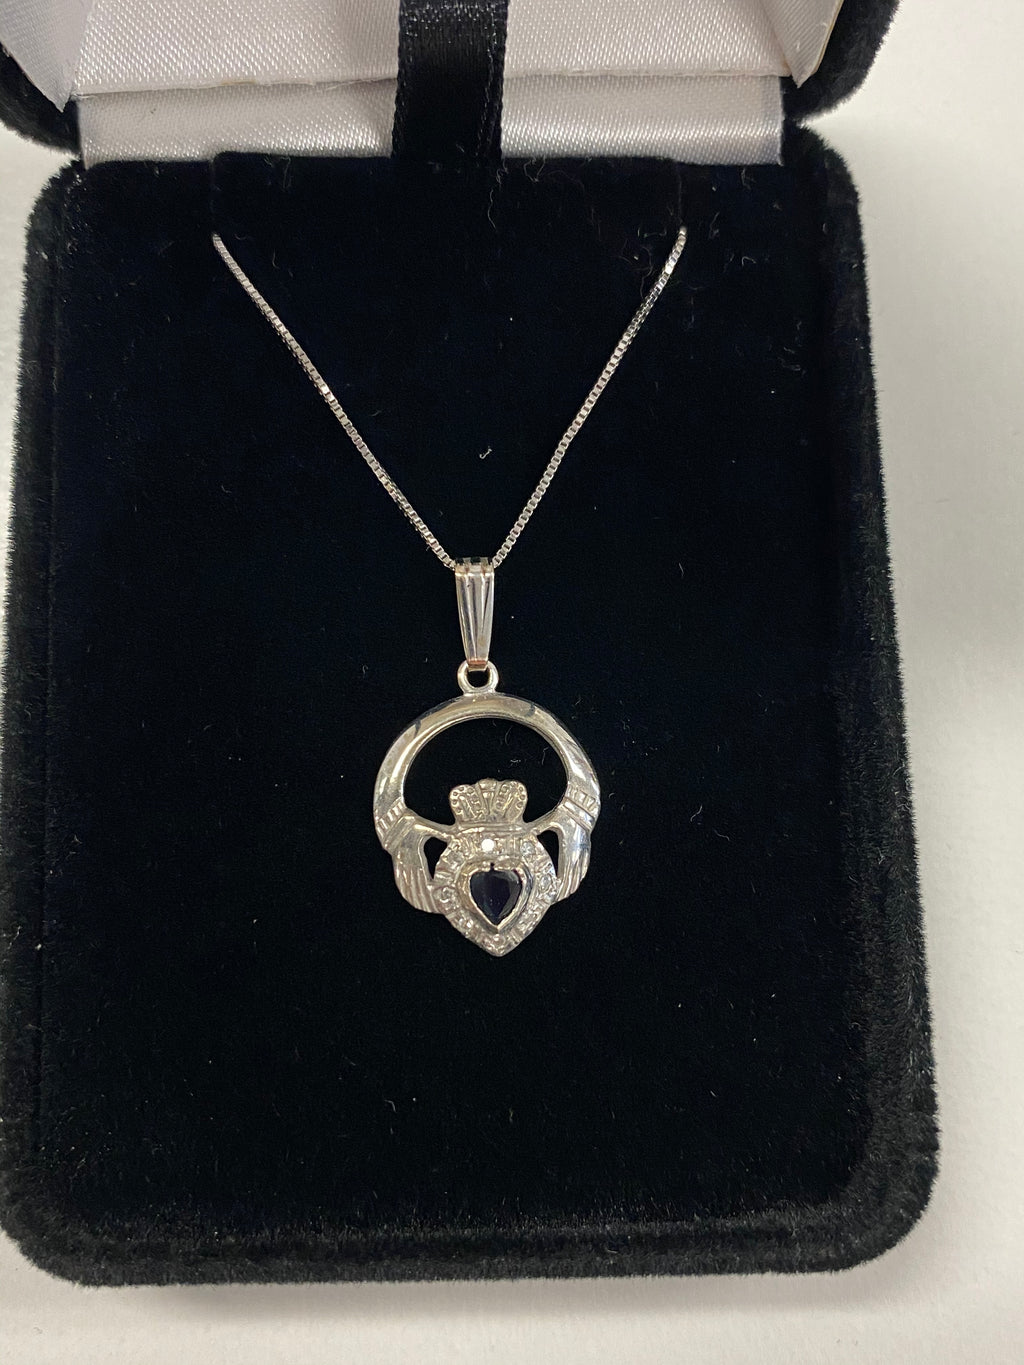 White Gold Claddagh Pendant with Diamonds and Stone